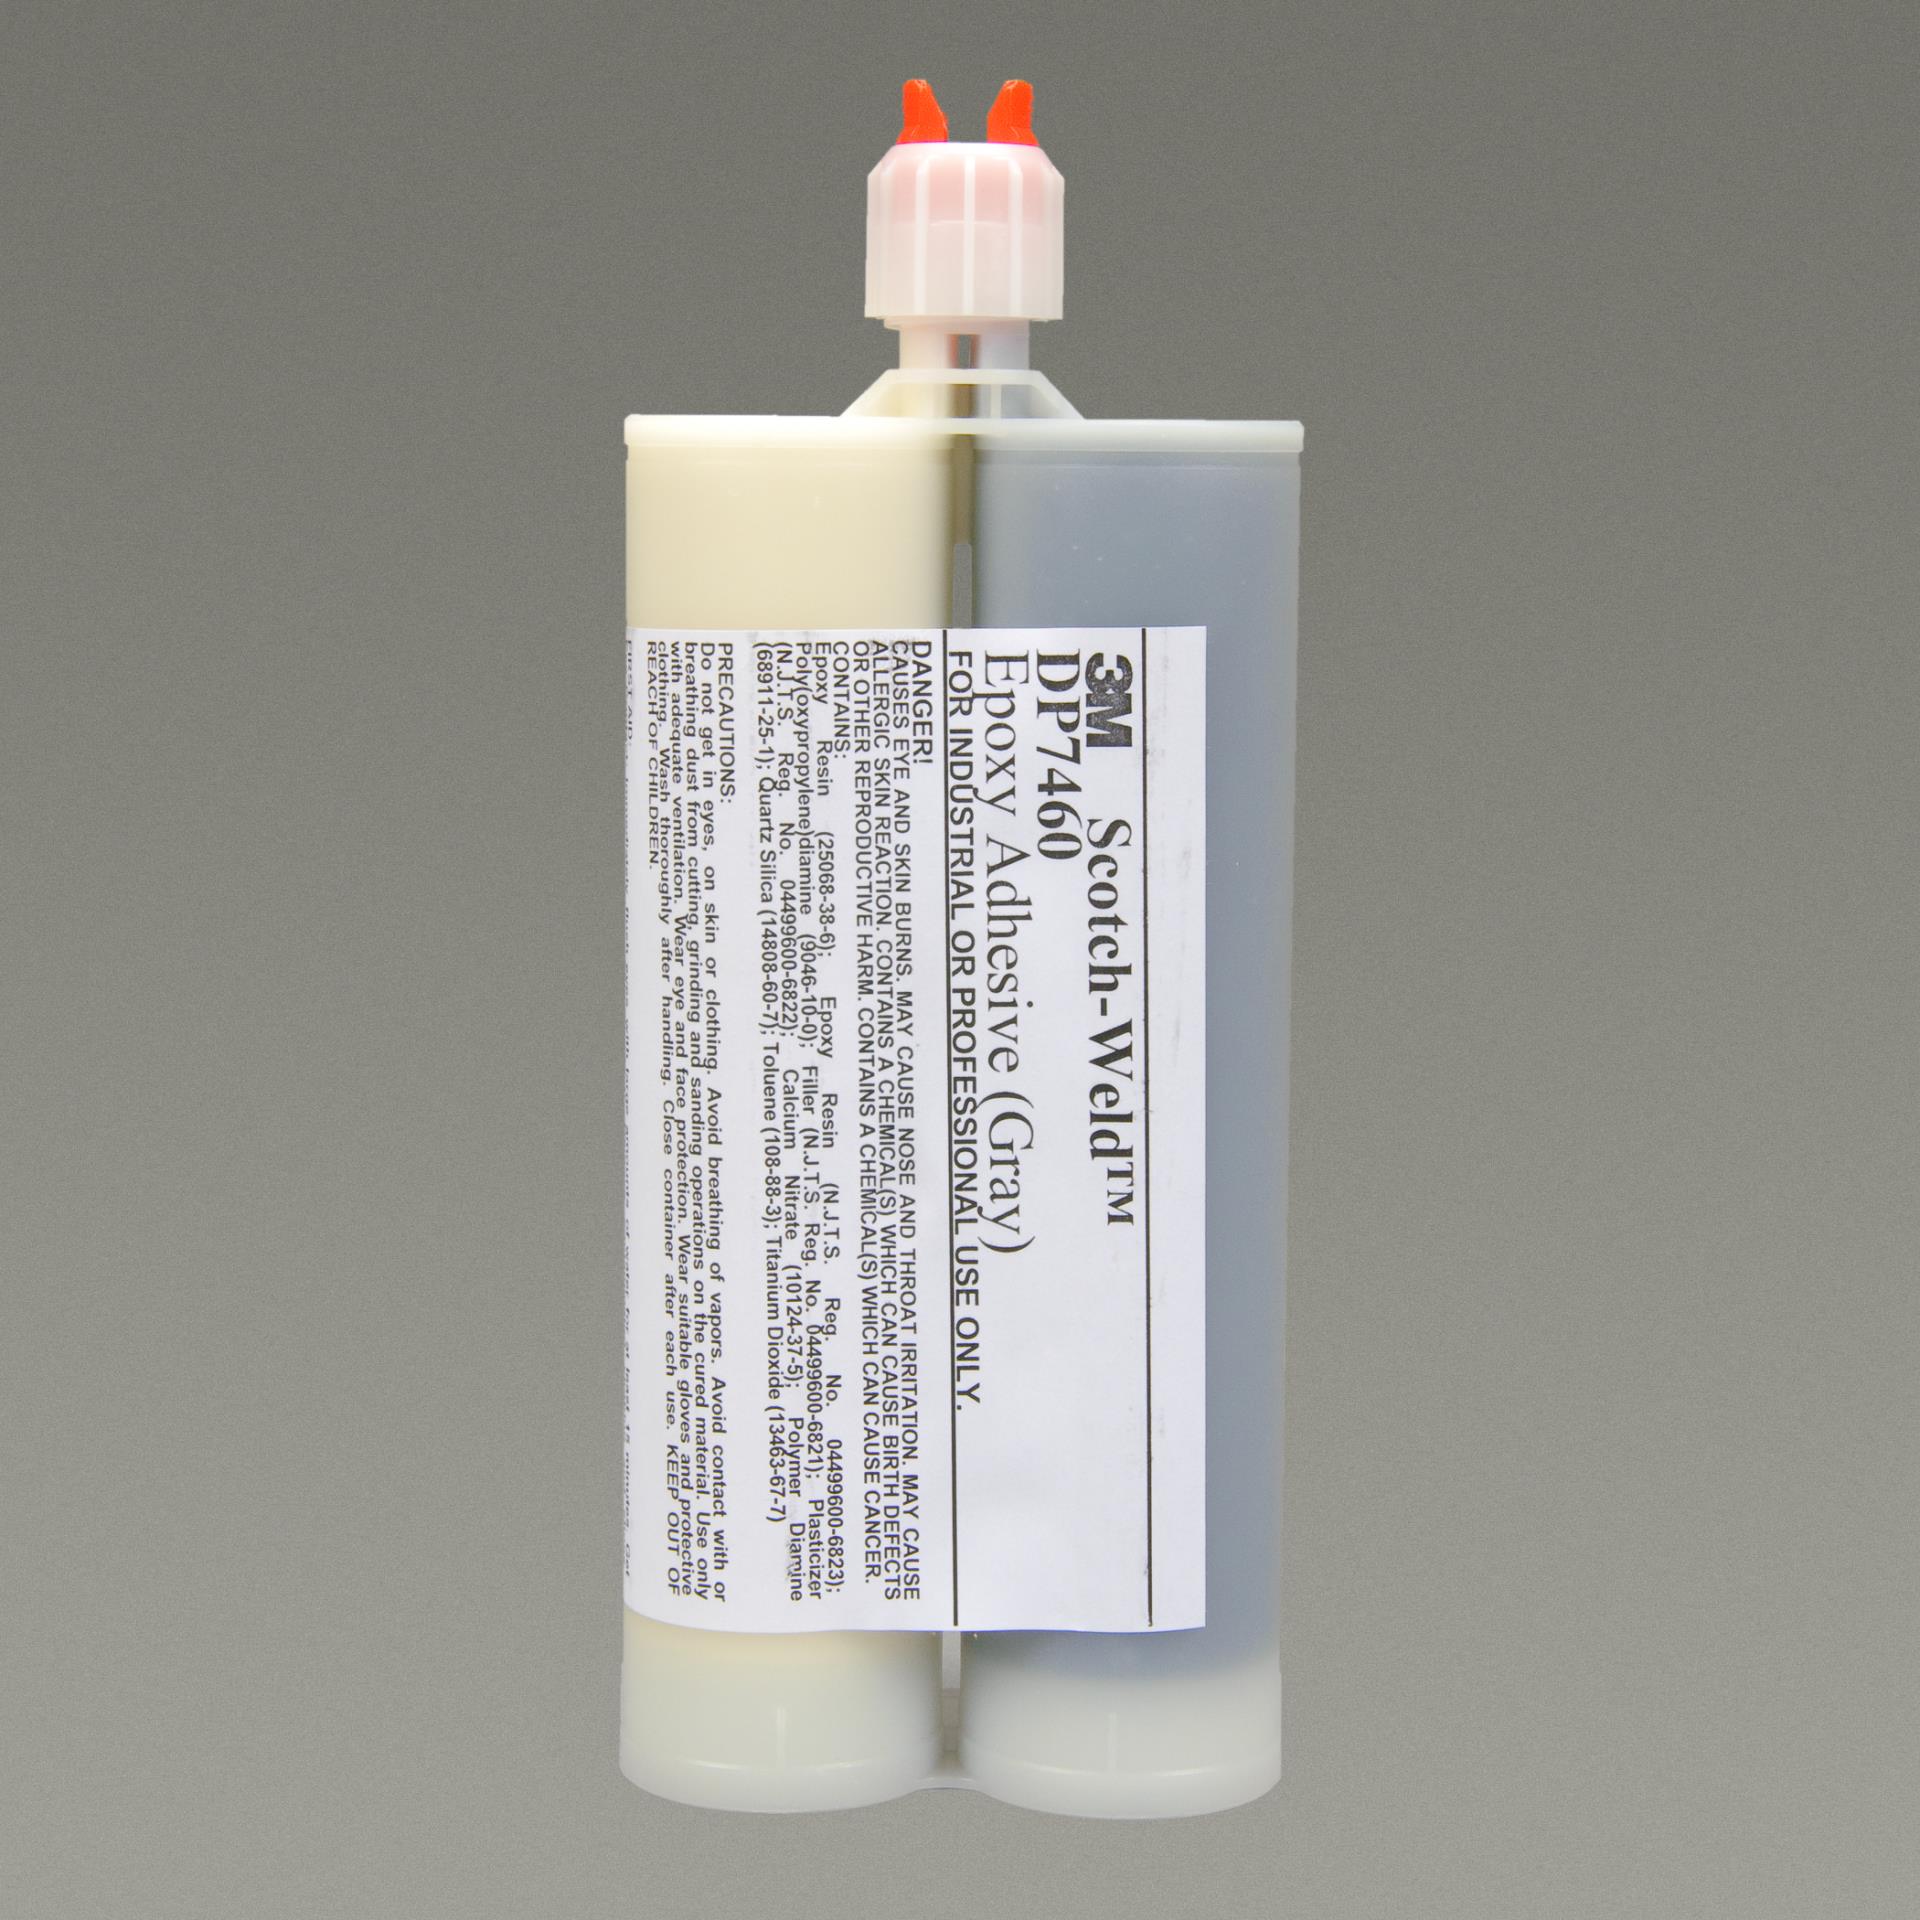 https://www.e-aircraftsupply.com/ItemImages/87/7000046487_3M_Scotch-Weld_Toughened_Epoxy_Adhesive_LSB60_Gray.jpg